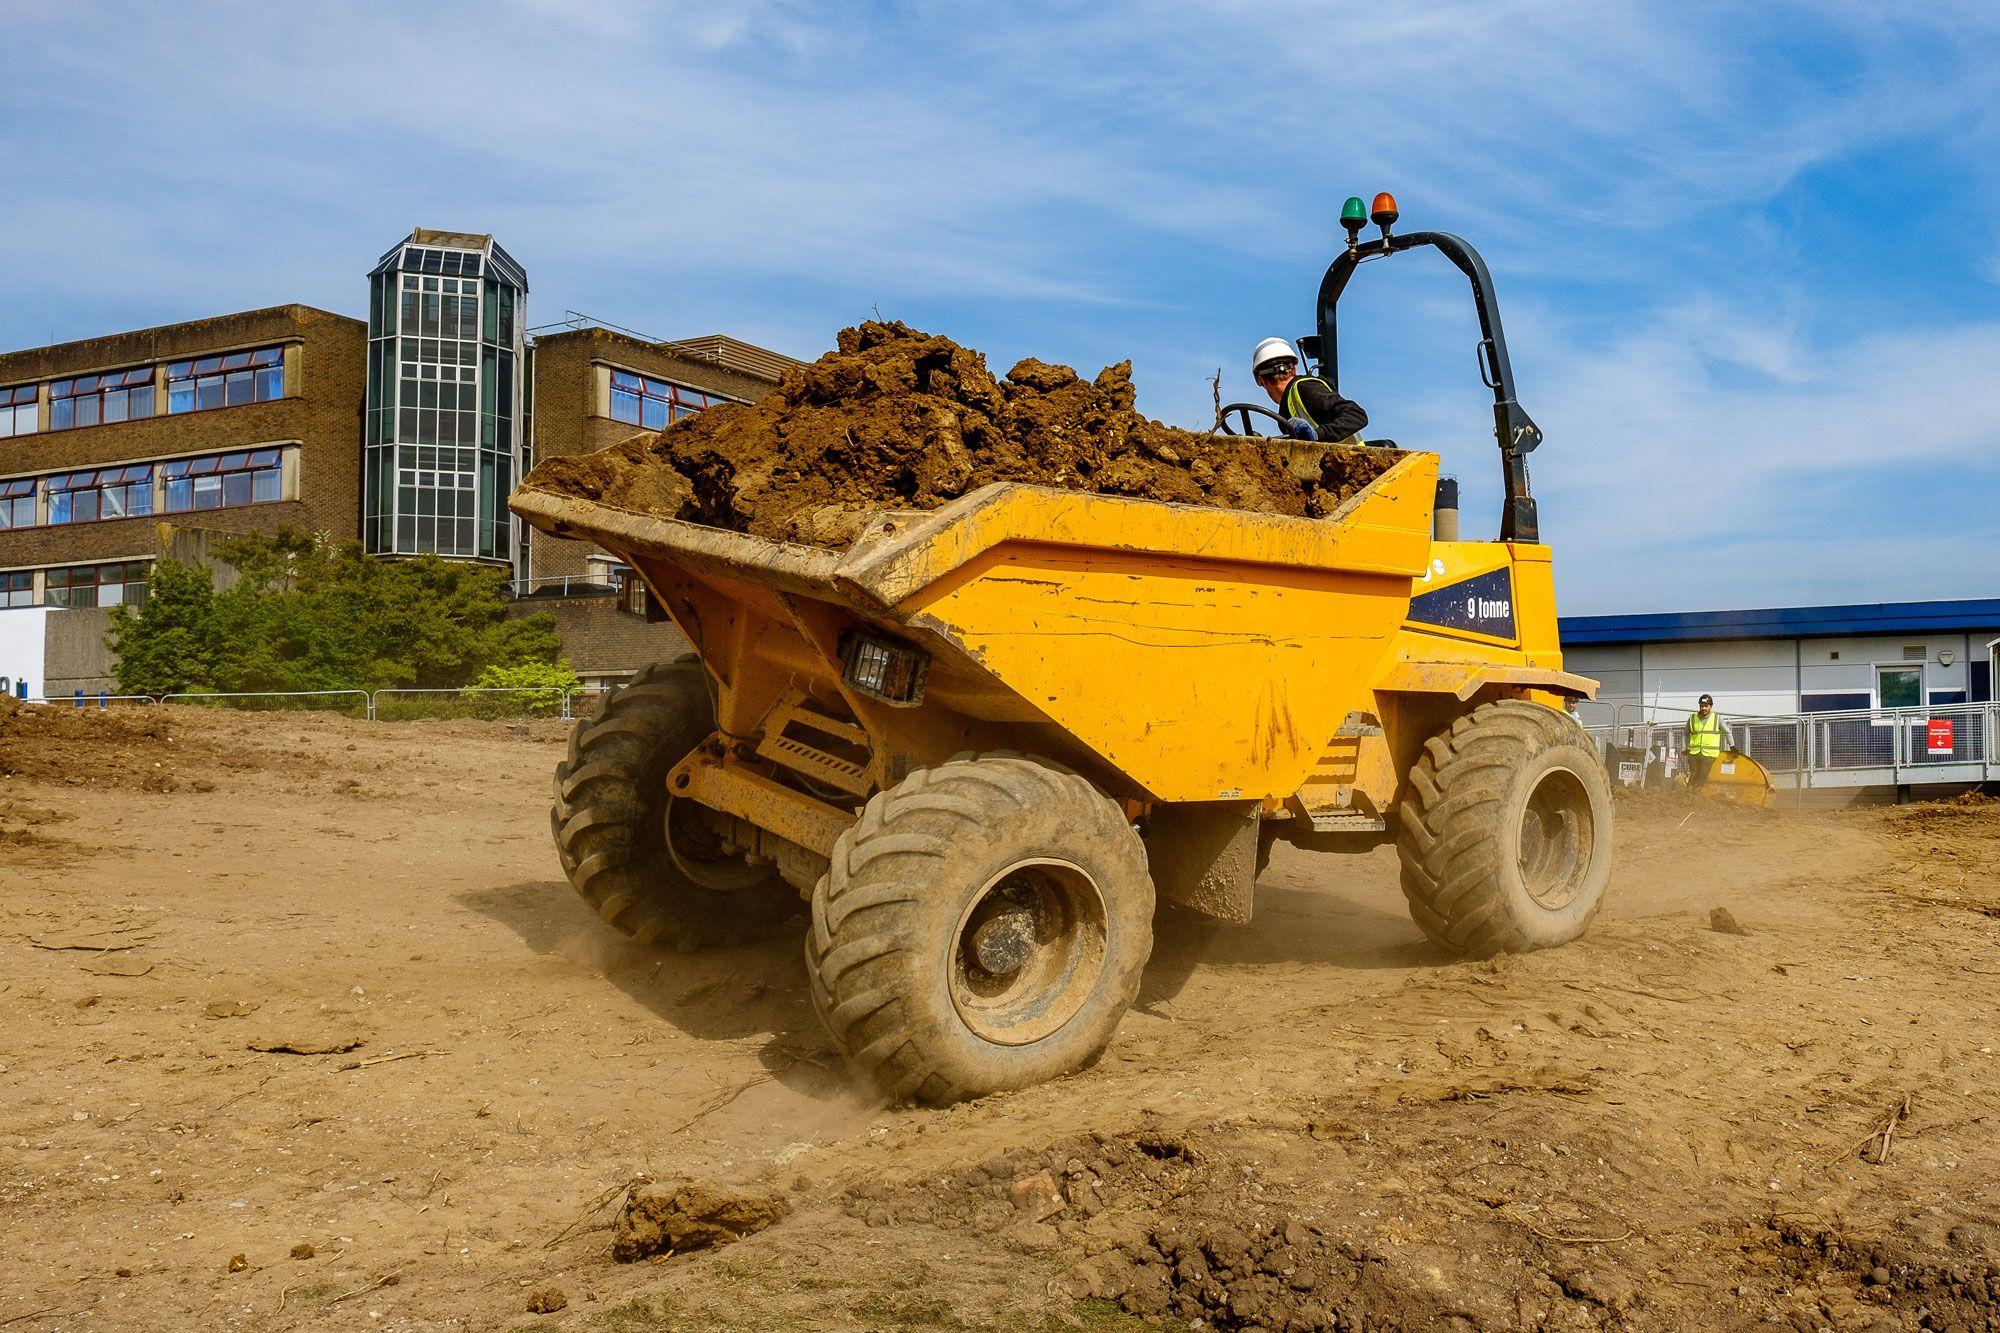 Dumper Truck loaded with material 